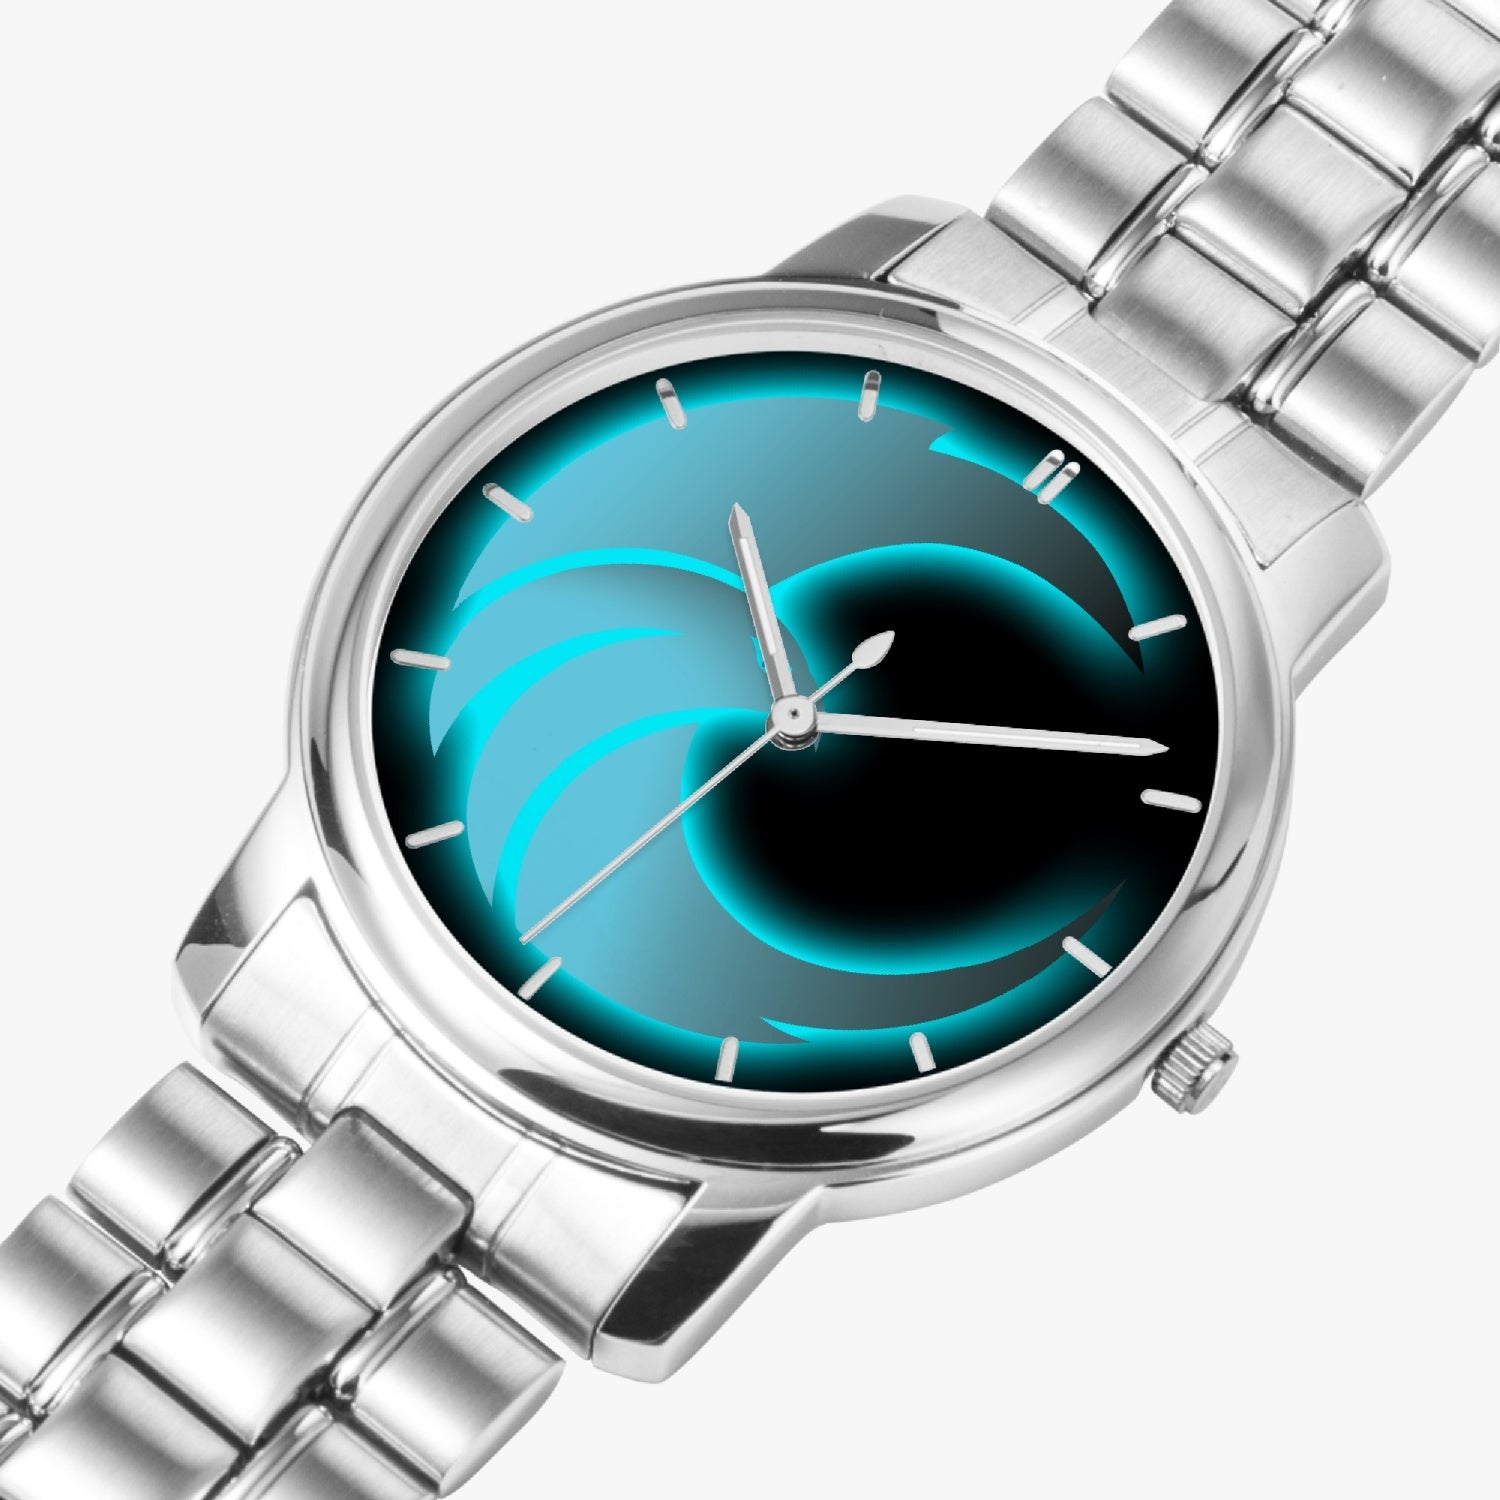 CURSED Folding Clasp Type Stainless Steel Quartz Watch (With Indicators)